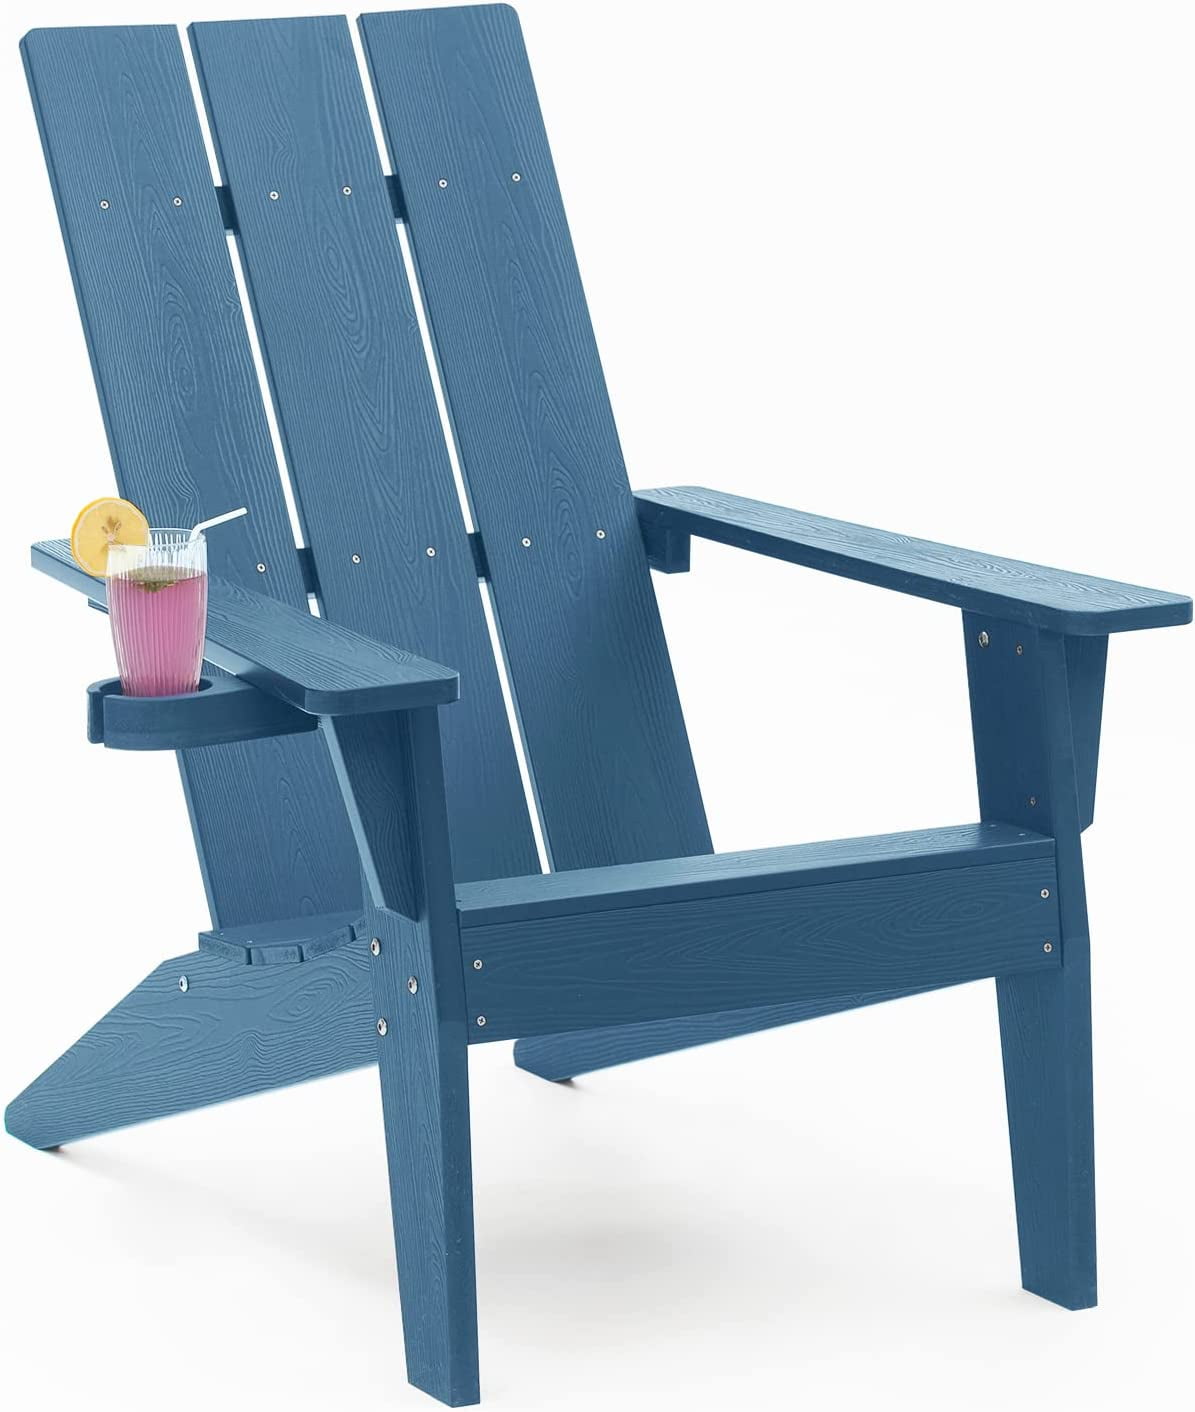 WINSOON Adirondack Chair with Cup Holder, Outdoor Patio Chair, Navy Blue Finish